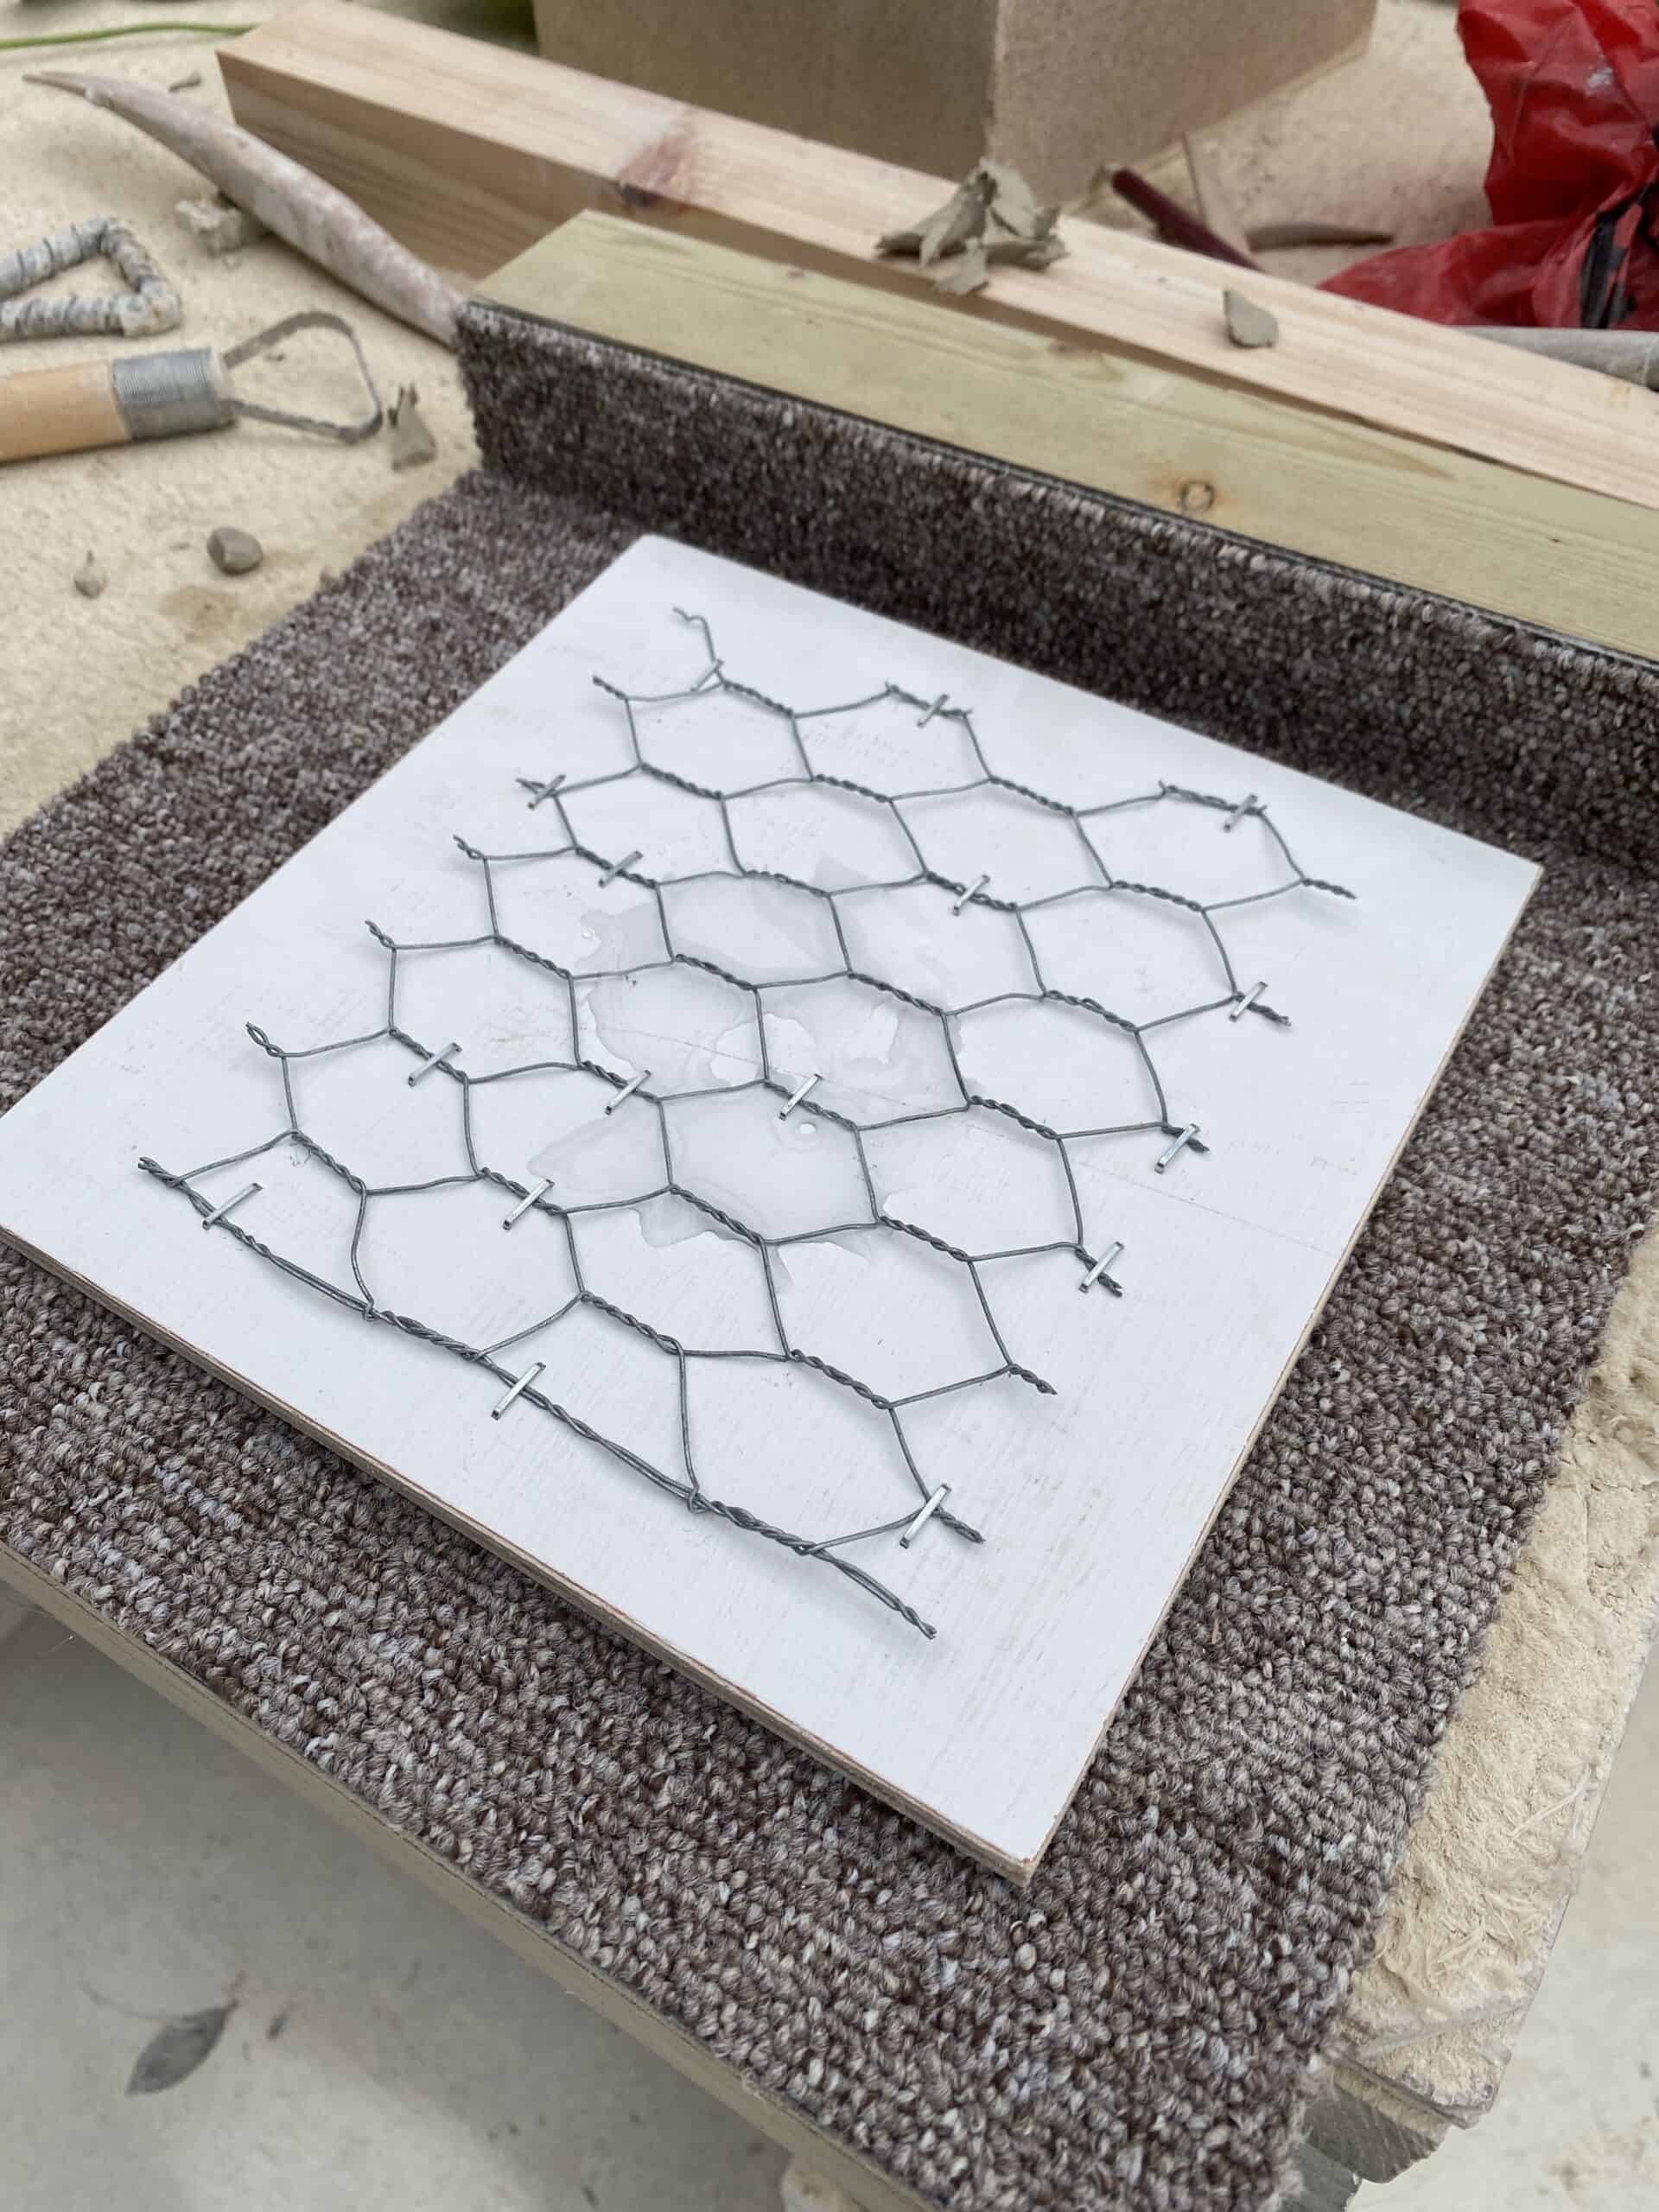 Chicken wire on a painted white piece of wood ready for the clay to go on top